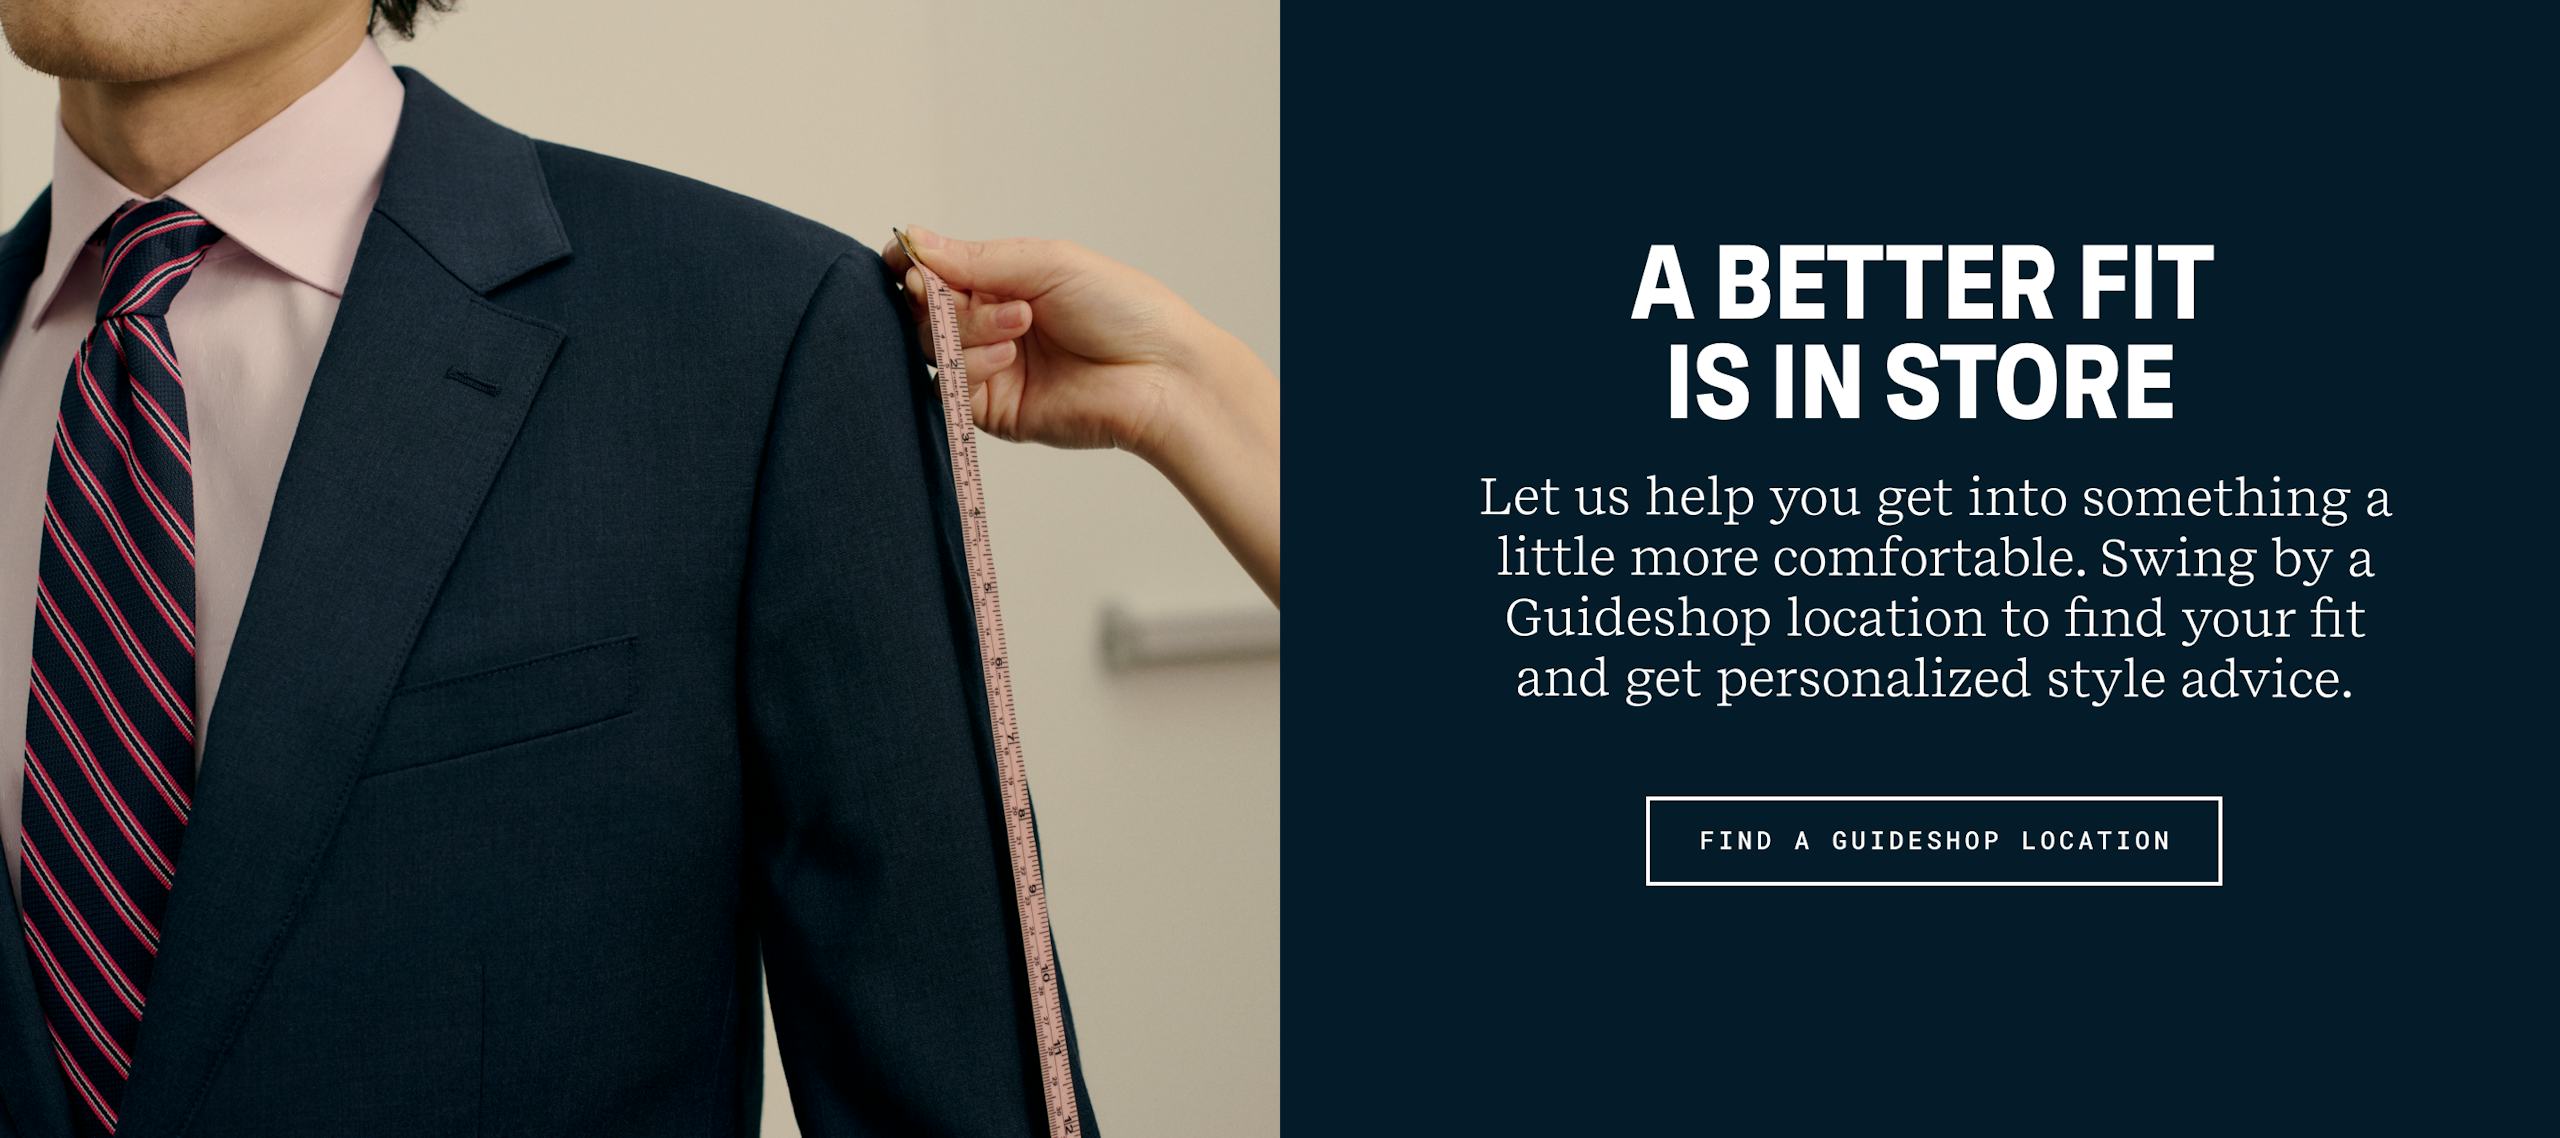 A Better Fit Is In Store | Let us help you get into something a little more comfortable. Swing by a Guideshop location to find your fit and get personalized style advice. | Find a Guideshop location